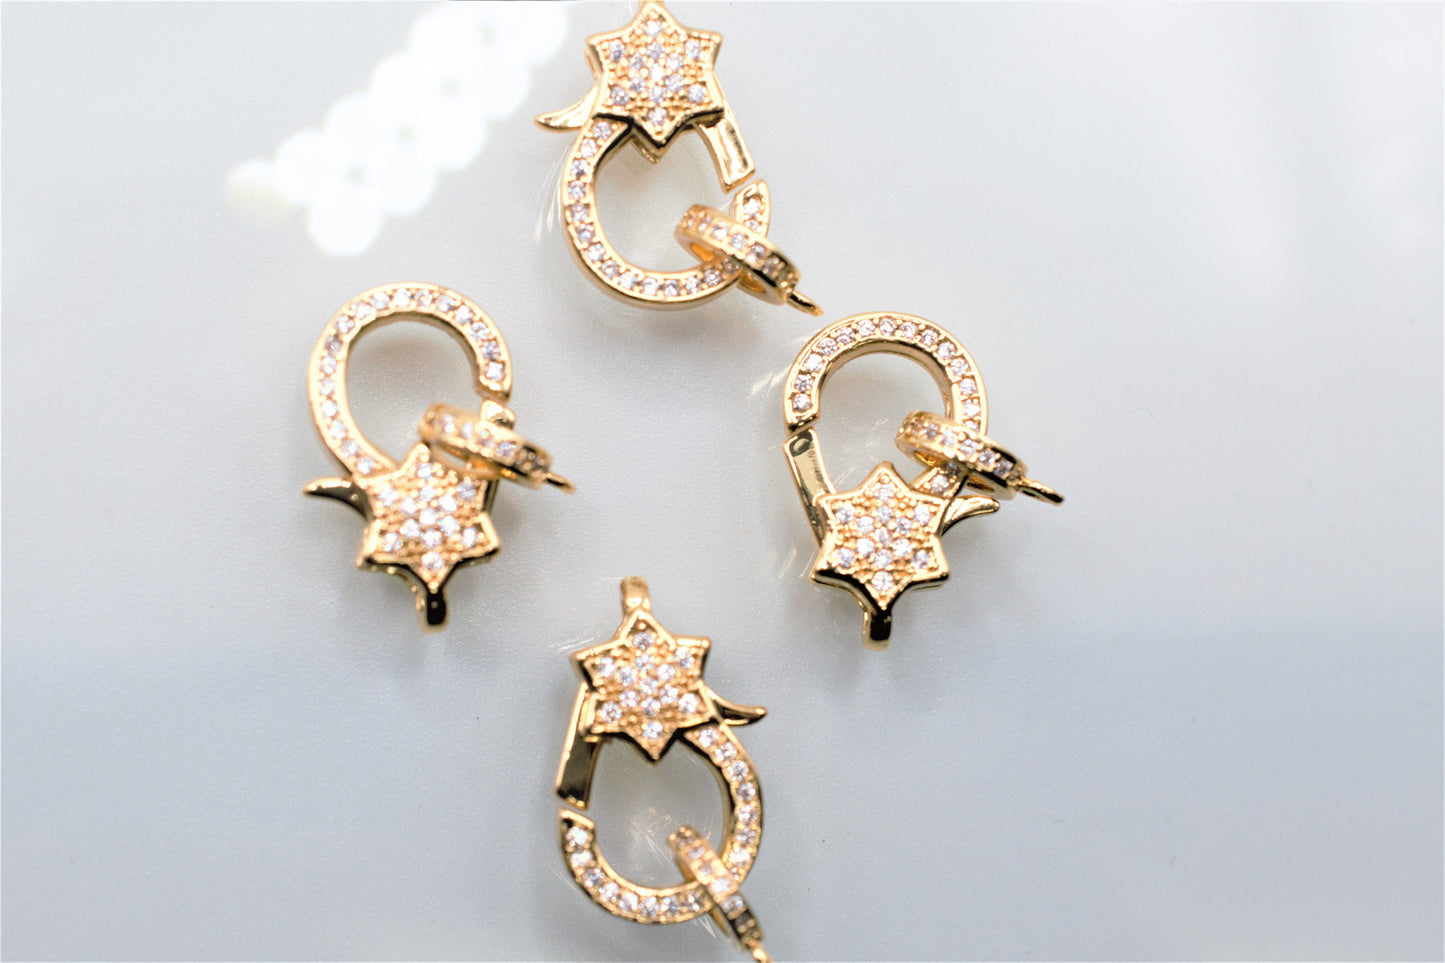 Lobster Clasp Craft Supplies Tools and Gold Findings zirconia Star round wheel charm connector fancy clasp